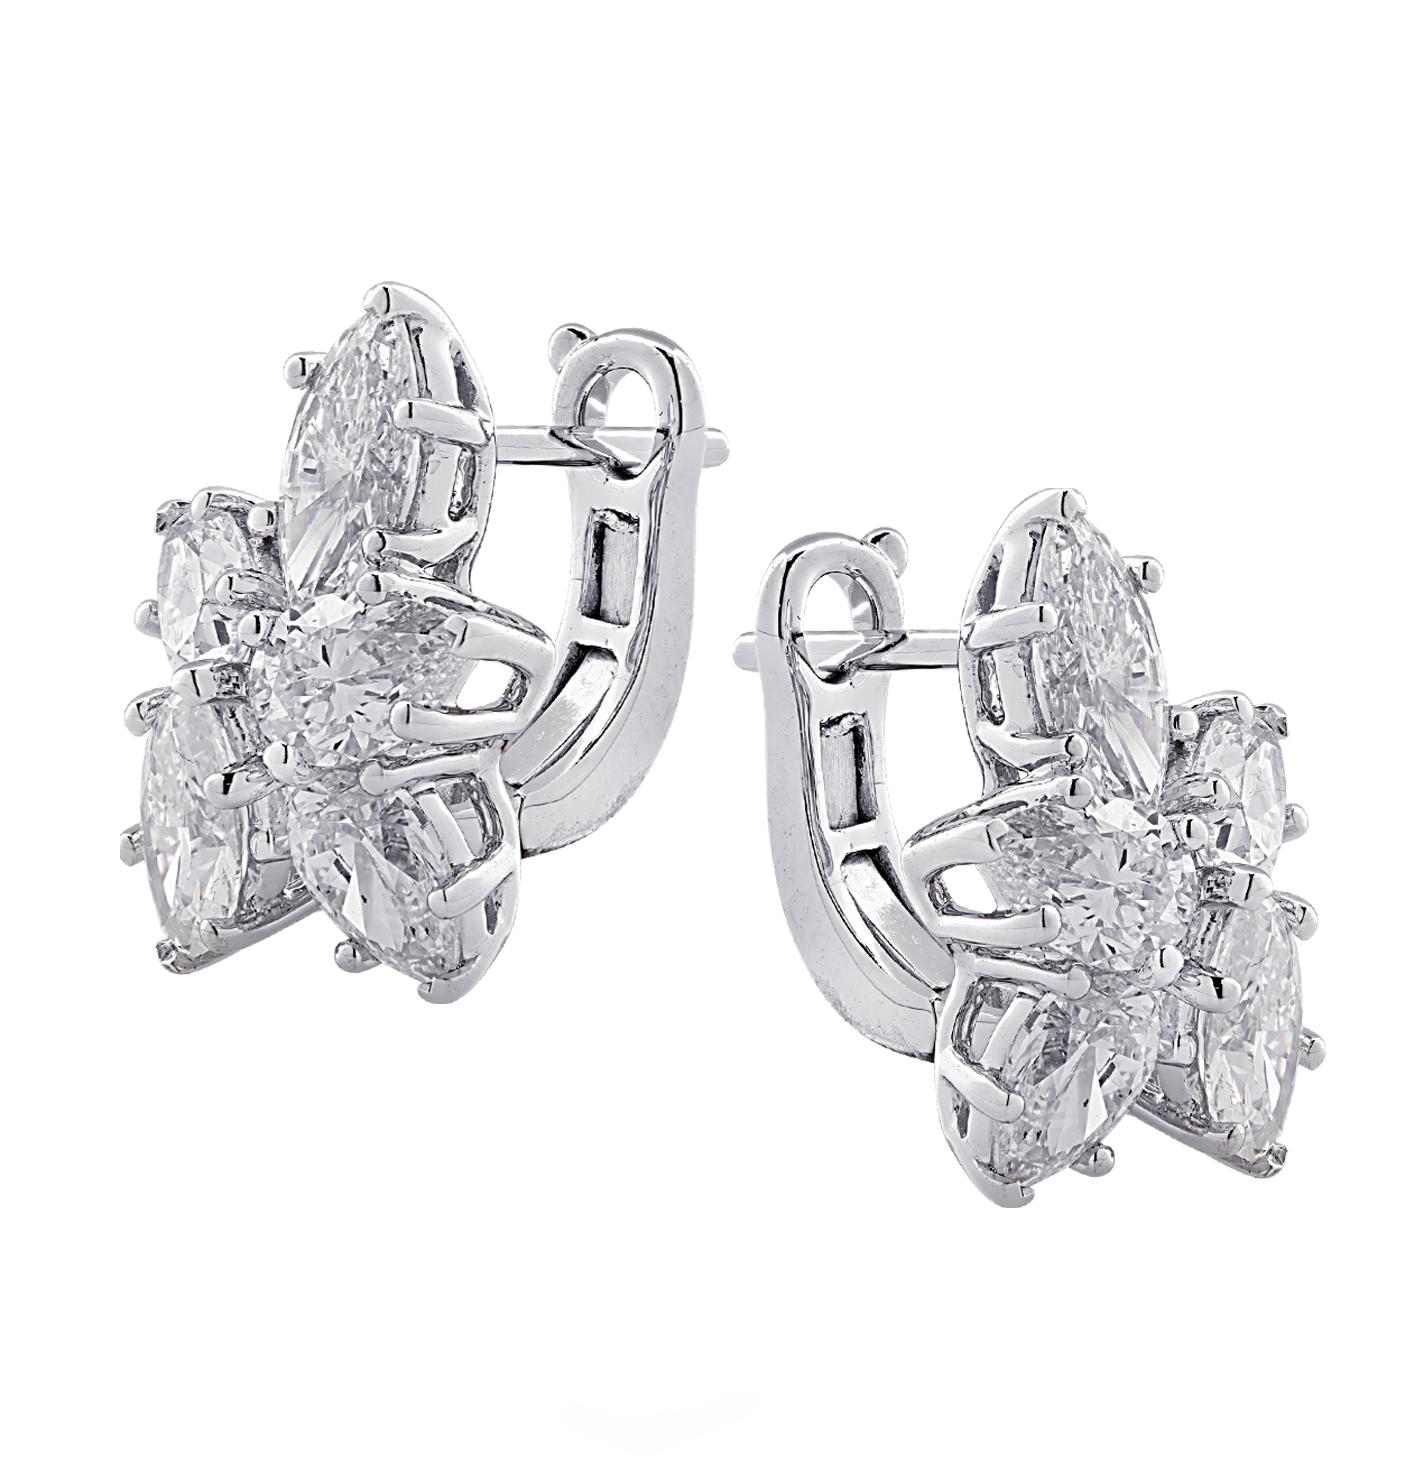 Spectacular Vivid Diamonds earrings crafted in 18 karat white gold showcasing 6 pear shape diamonds weighing 1.85 carats total, G-H color, VS-SI clarity and 4 marquise cut diamonds weighing 1.79 carats total, G-H color, VS-SI clarity. The diamonds